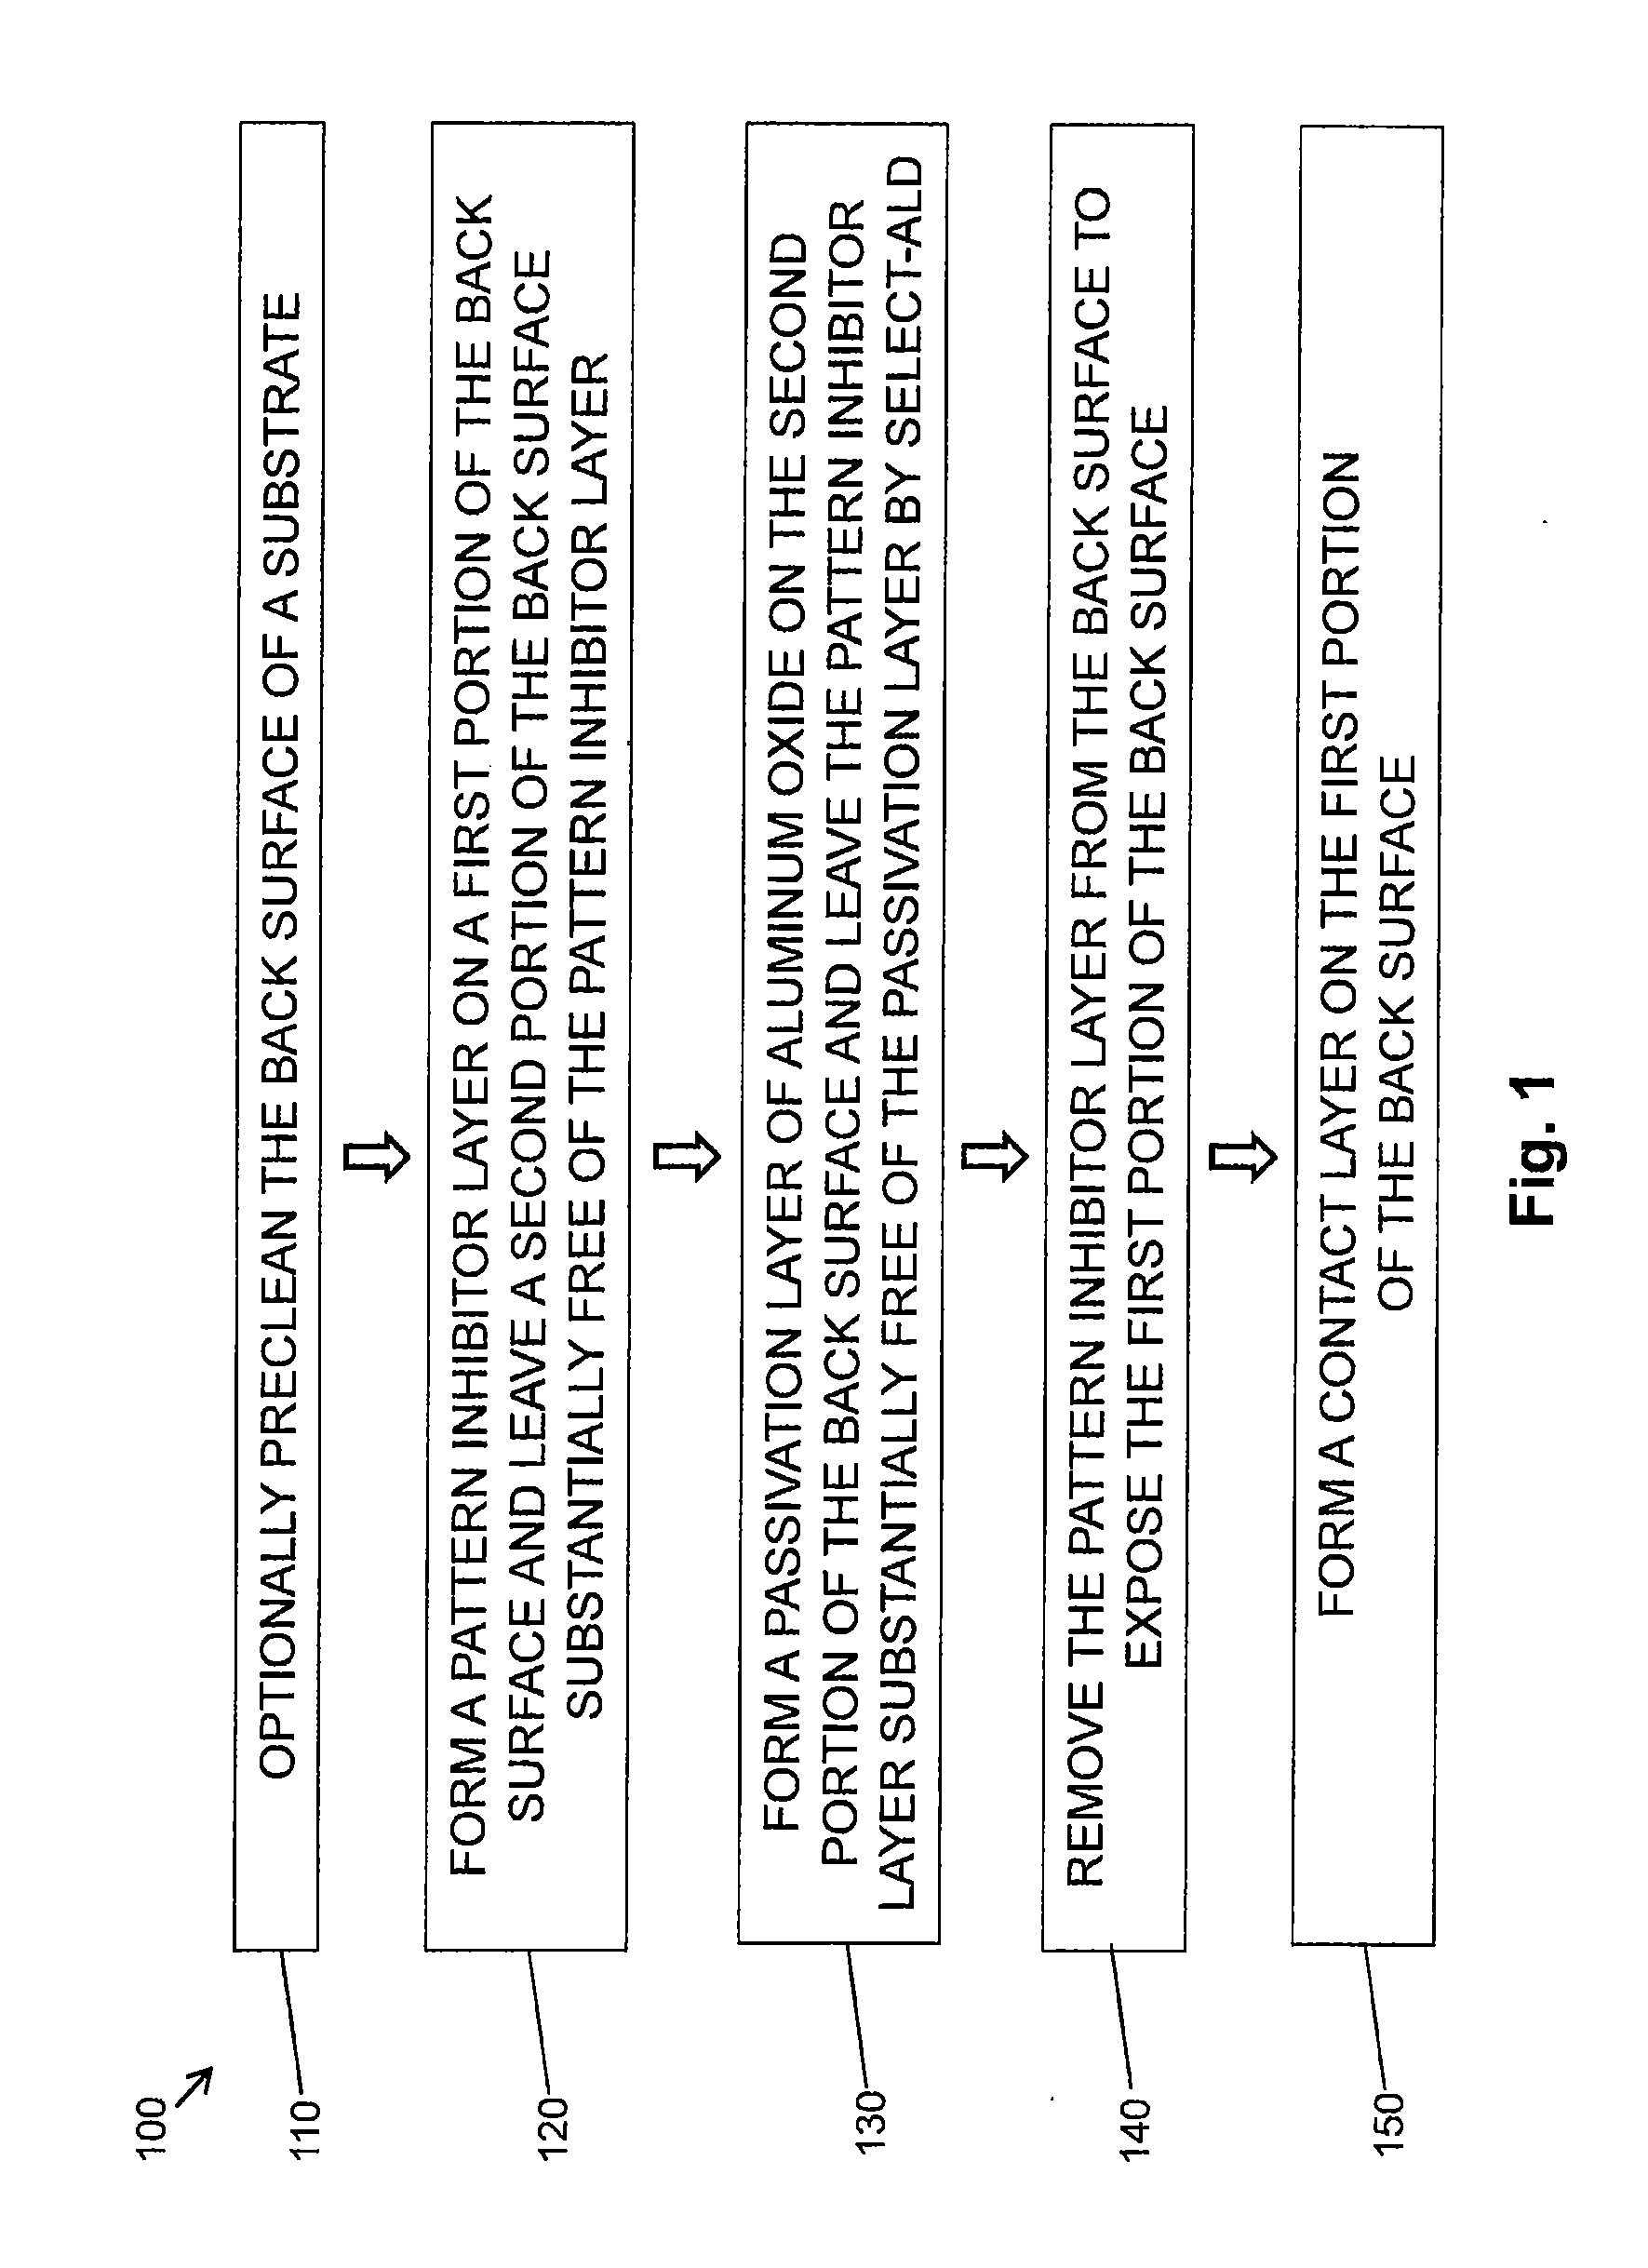 Selective atomic layer deposition of passivation layers for silicon-based photovoltaic devices